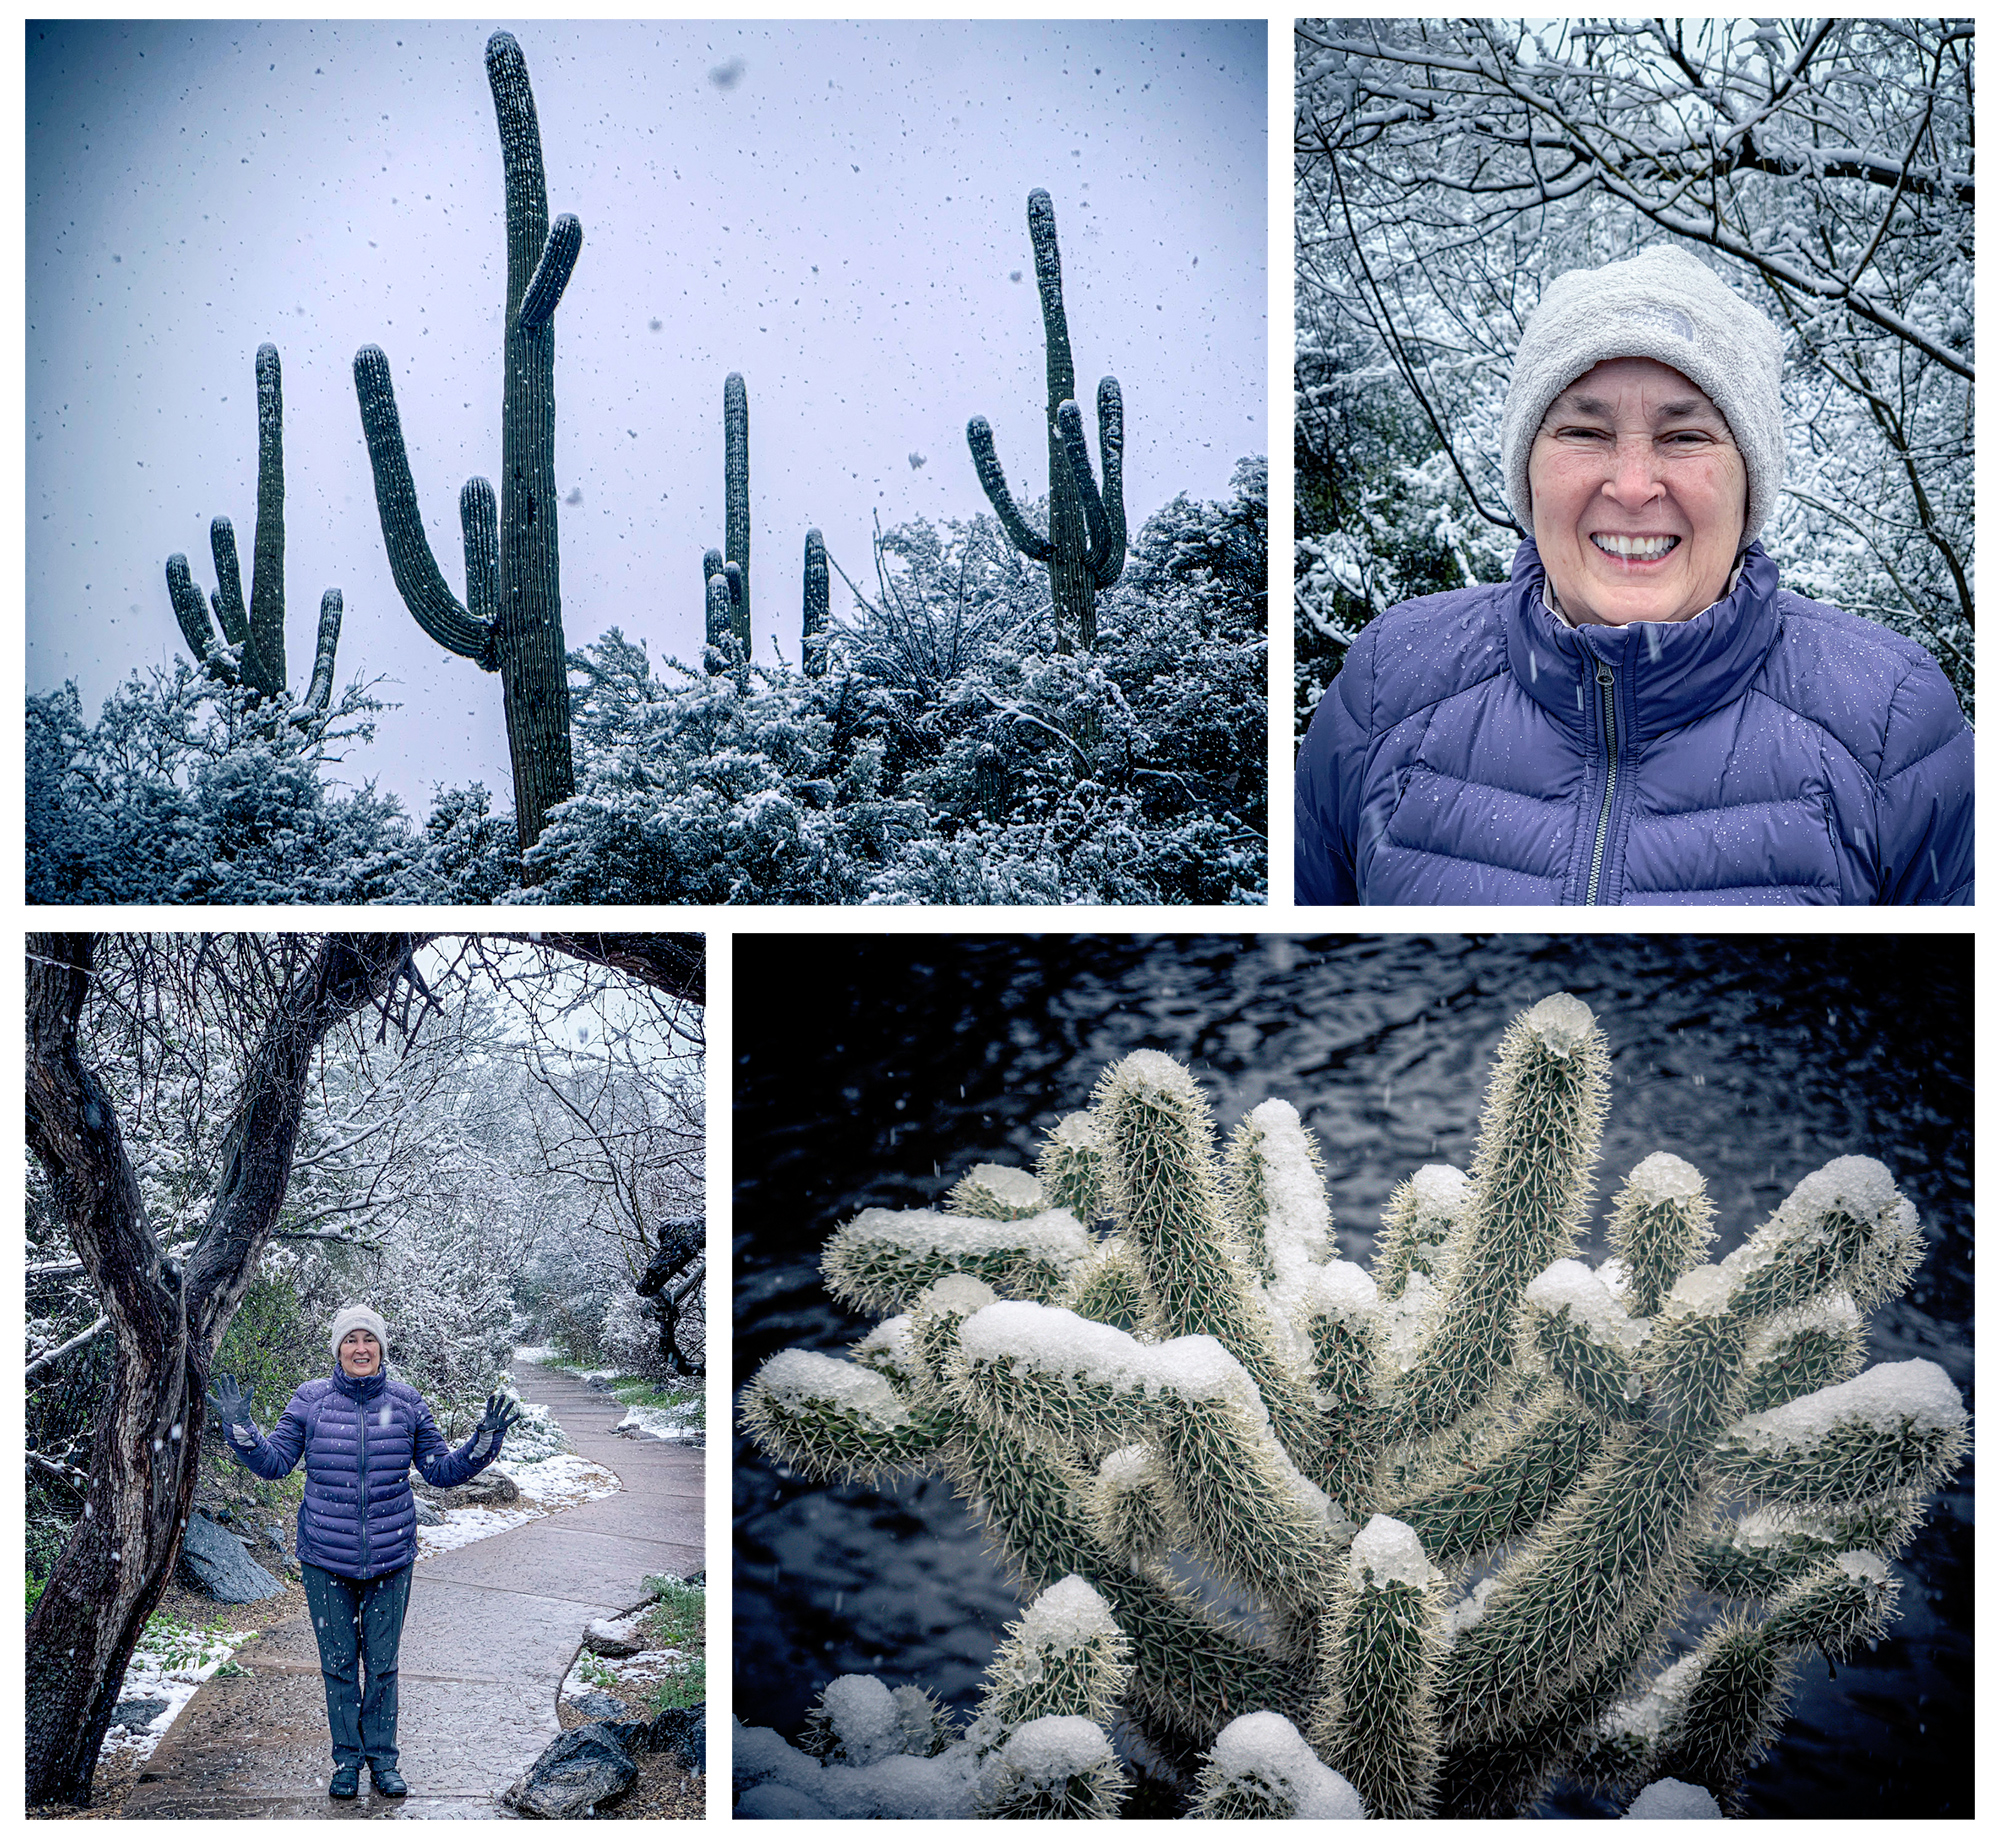 Here are shots from our hotel grounds when we ventured out on the morning of February 22, 2019. By Chicago standards, a mild snowfall but it wasn’t anywhere near 69°F. That’s my wife Becky laughing in the snow!